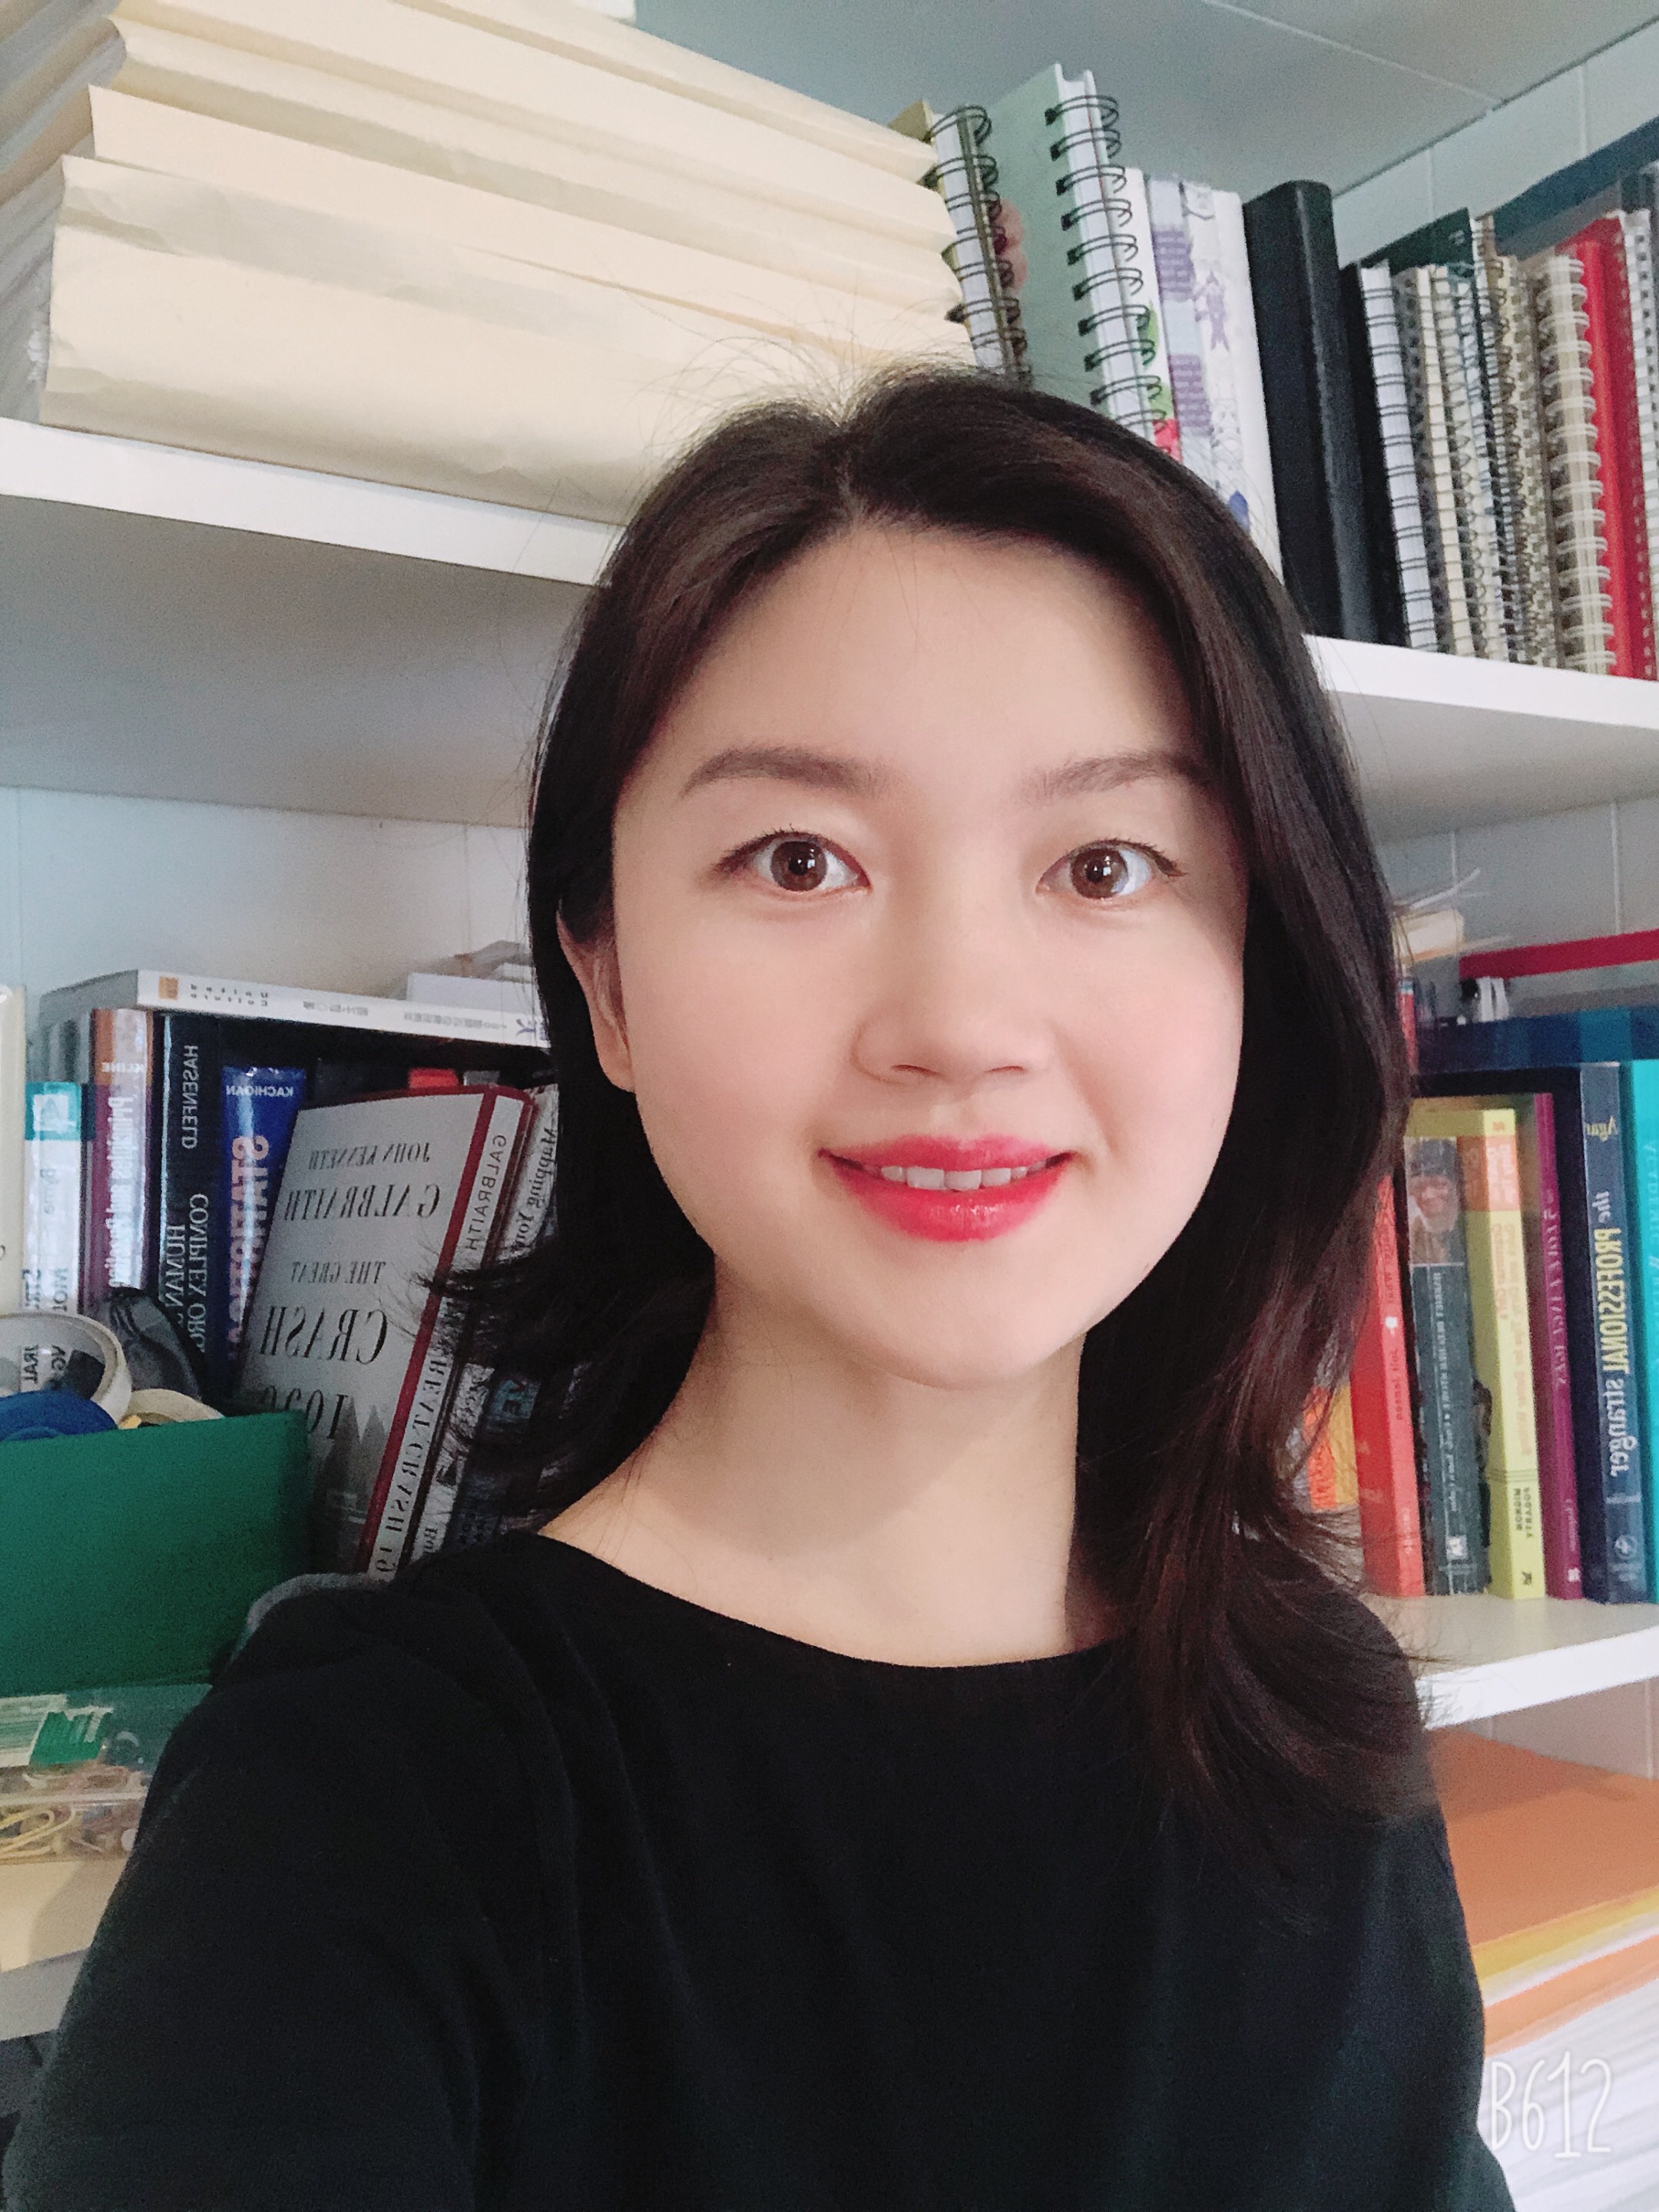 Qianwei Zhao, Ph.D., assistant professor and co-director of the Baylor IMPACT Lab at the Diana R. Garland School of Social Work at Baylor University